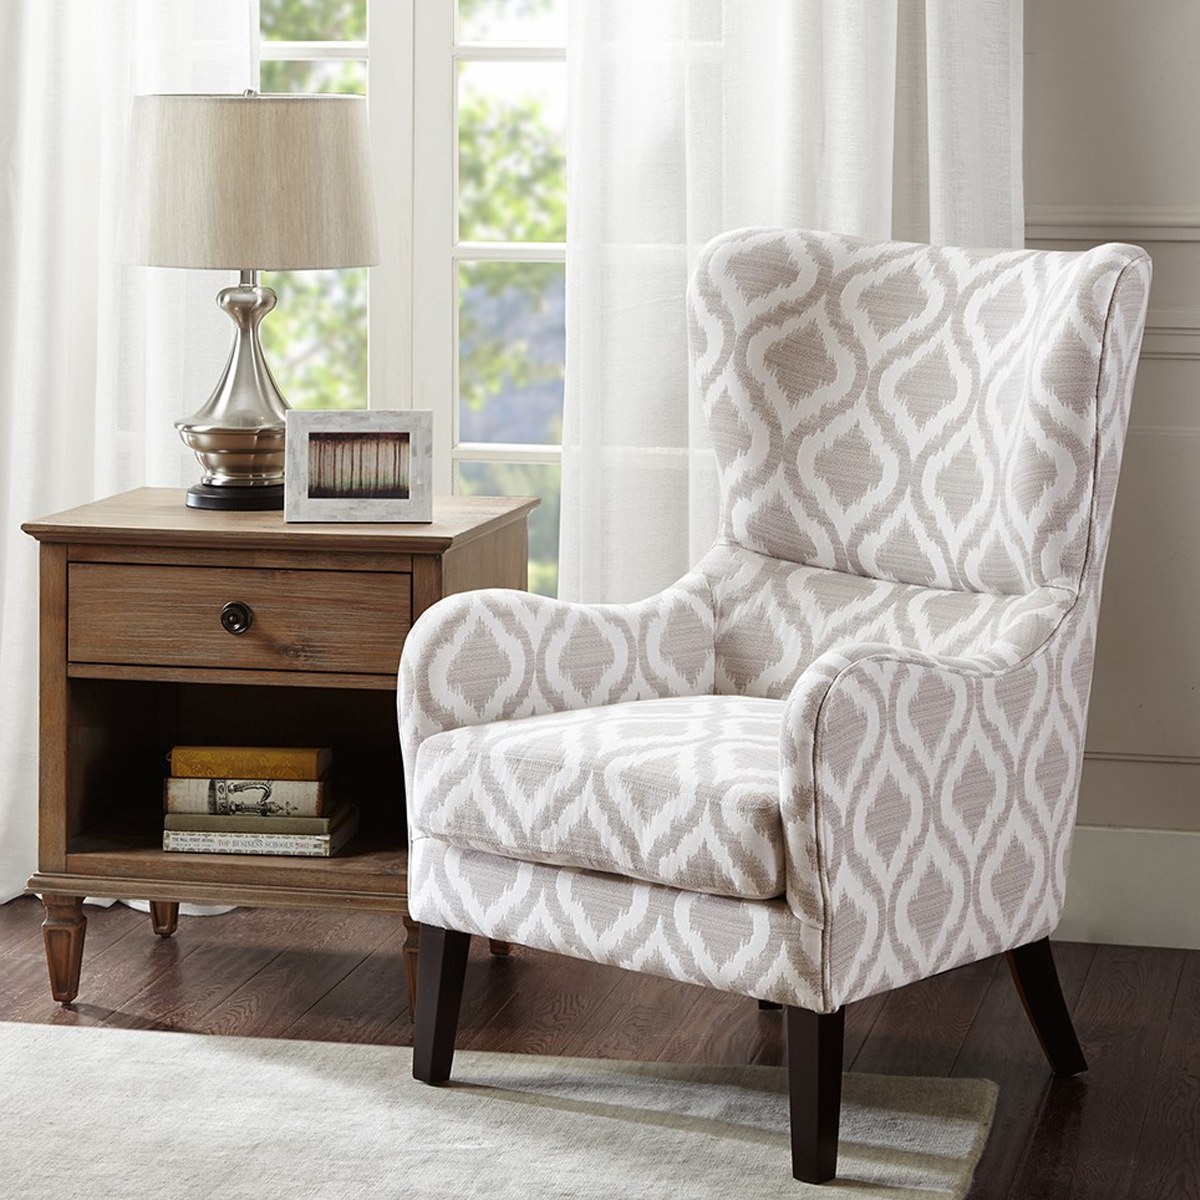 Picture of ADRIANNE SWOOP WING CHAIR